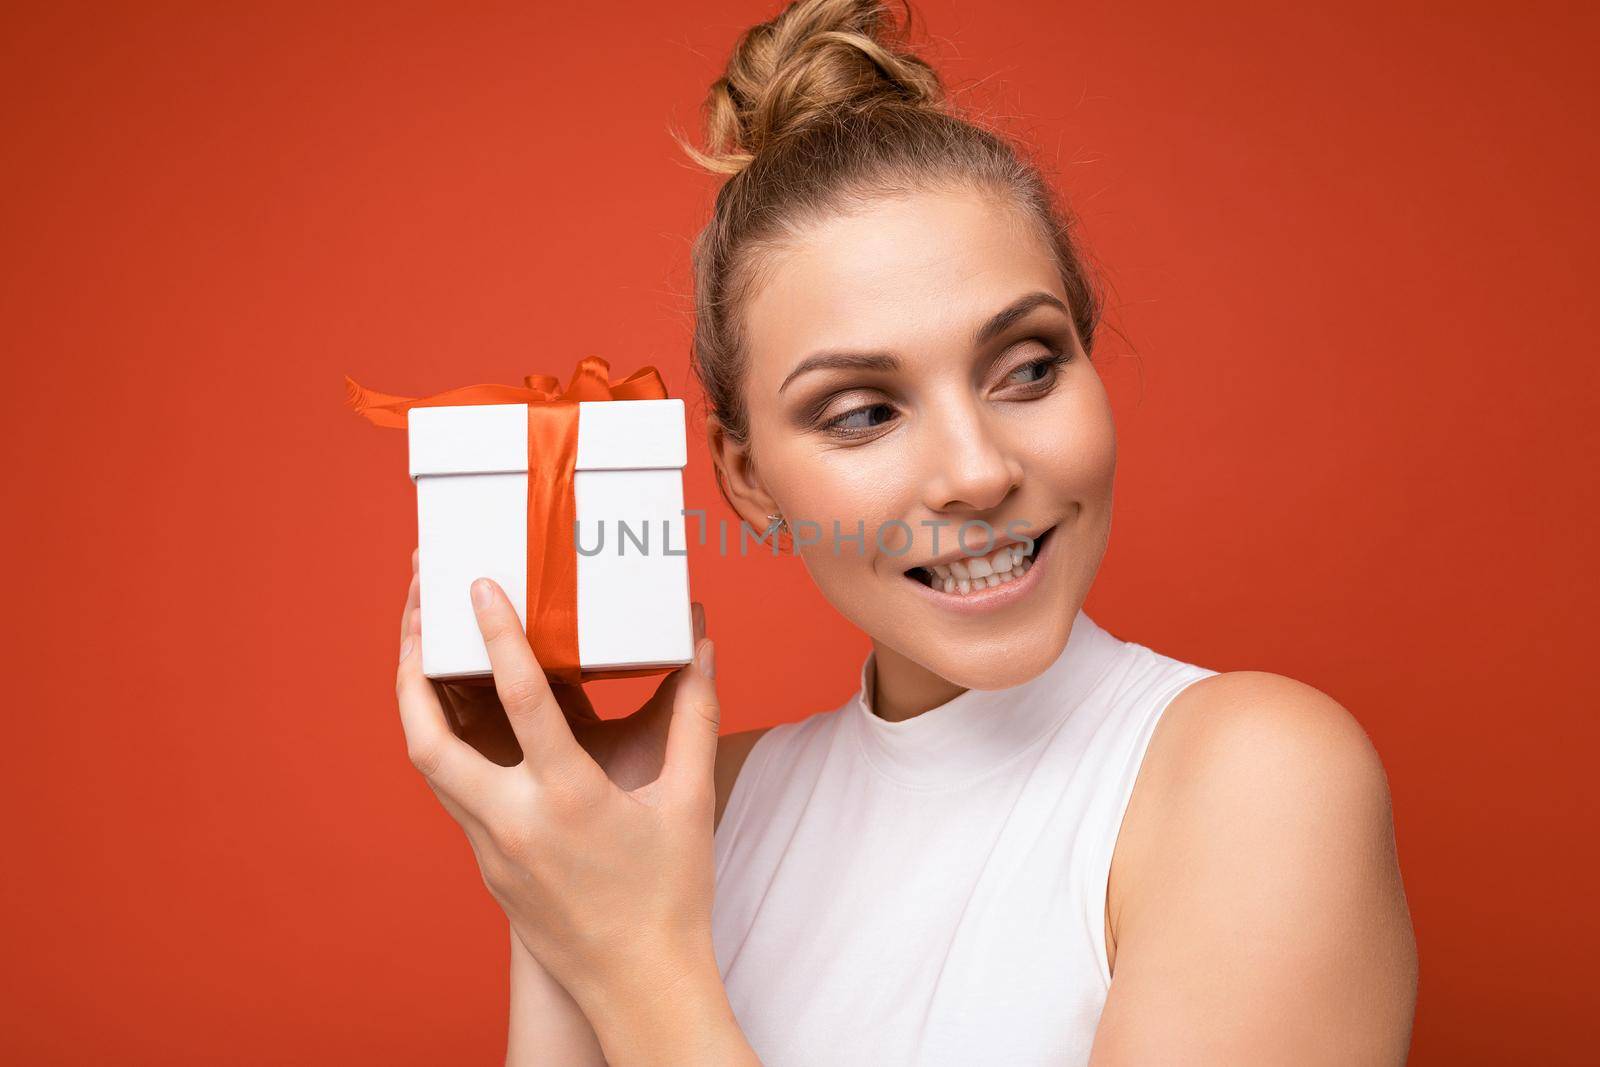 Portrait photo shot of attractive happy emotional young blonde woman isolated over red background wall wearing white top holding gift box and looking to the side.